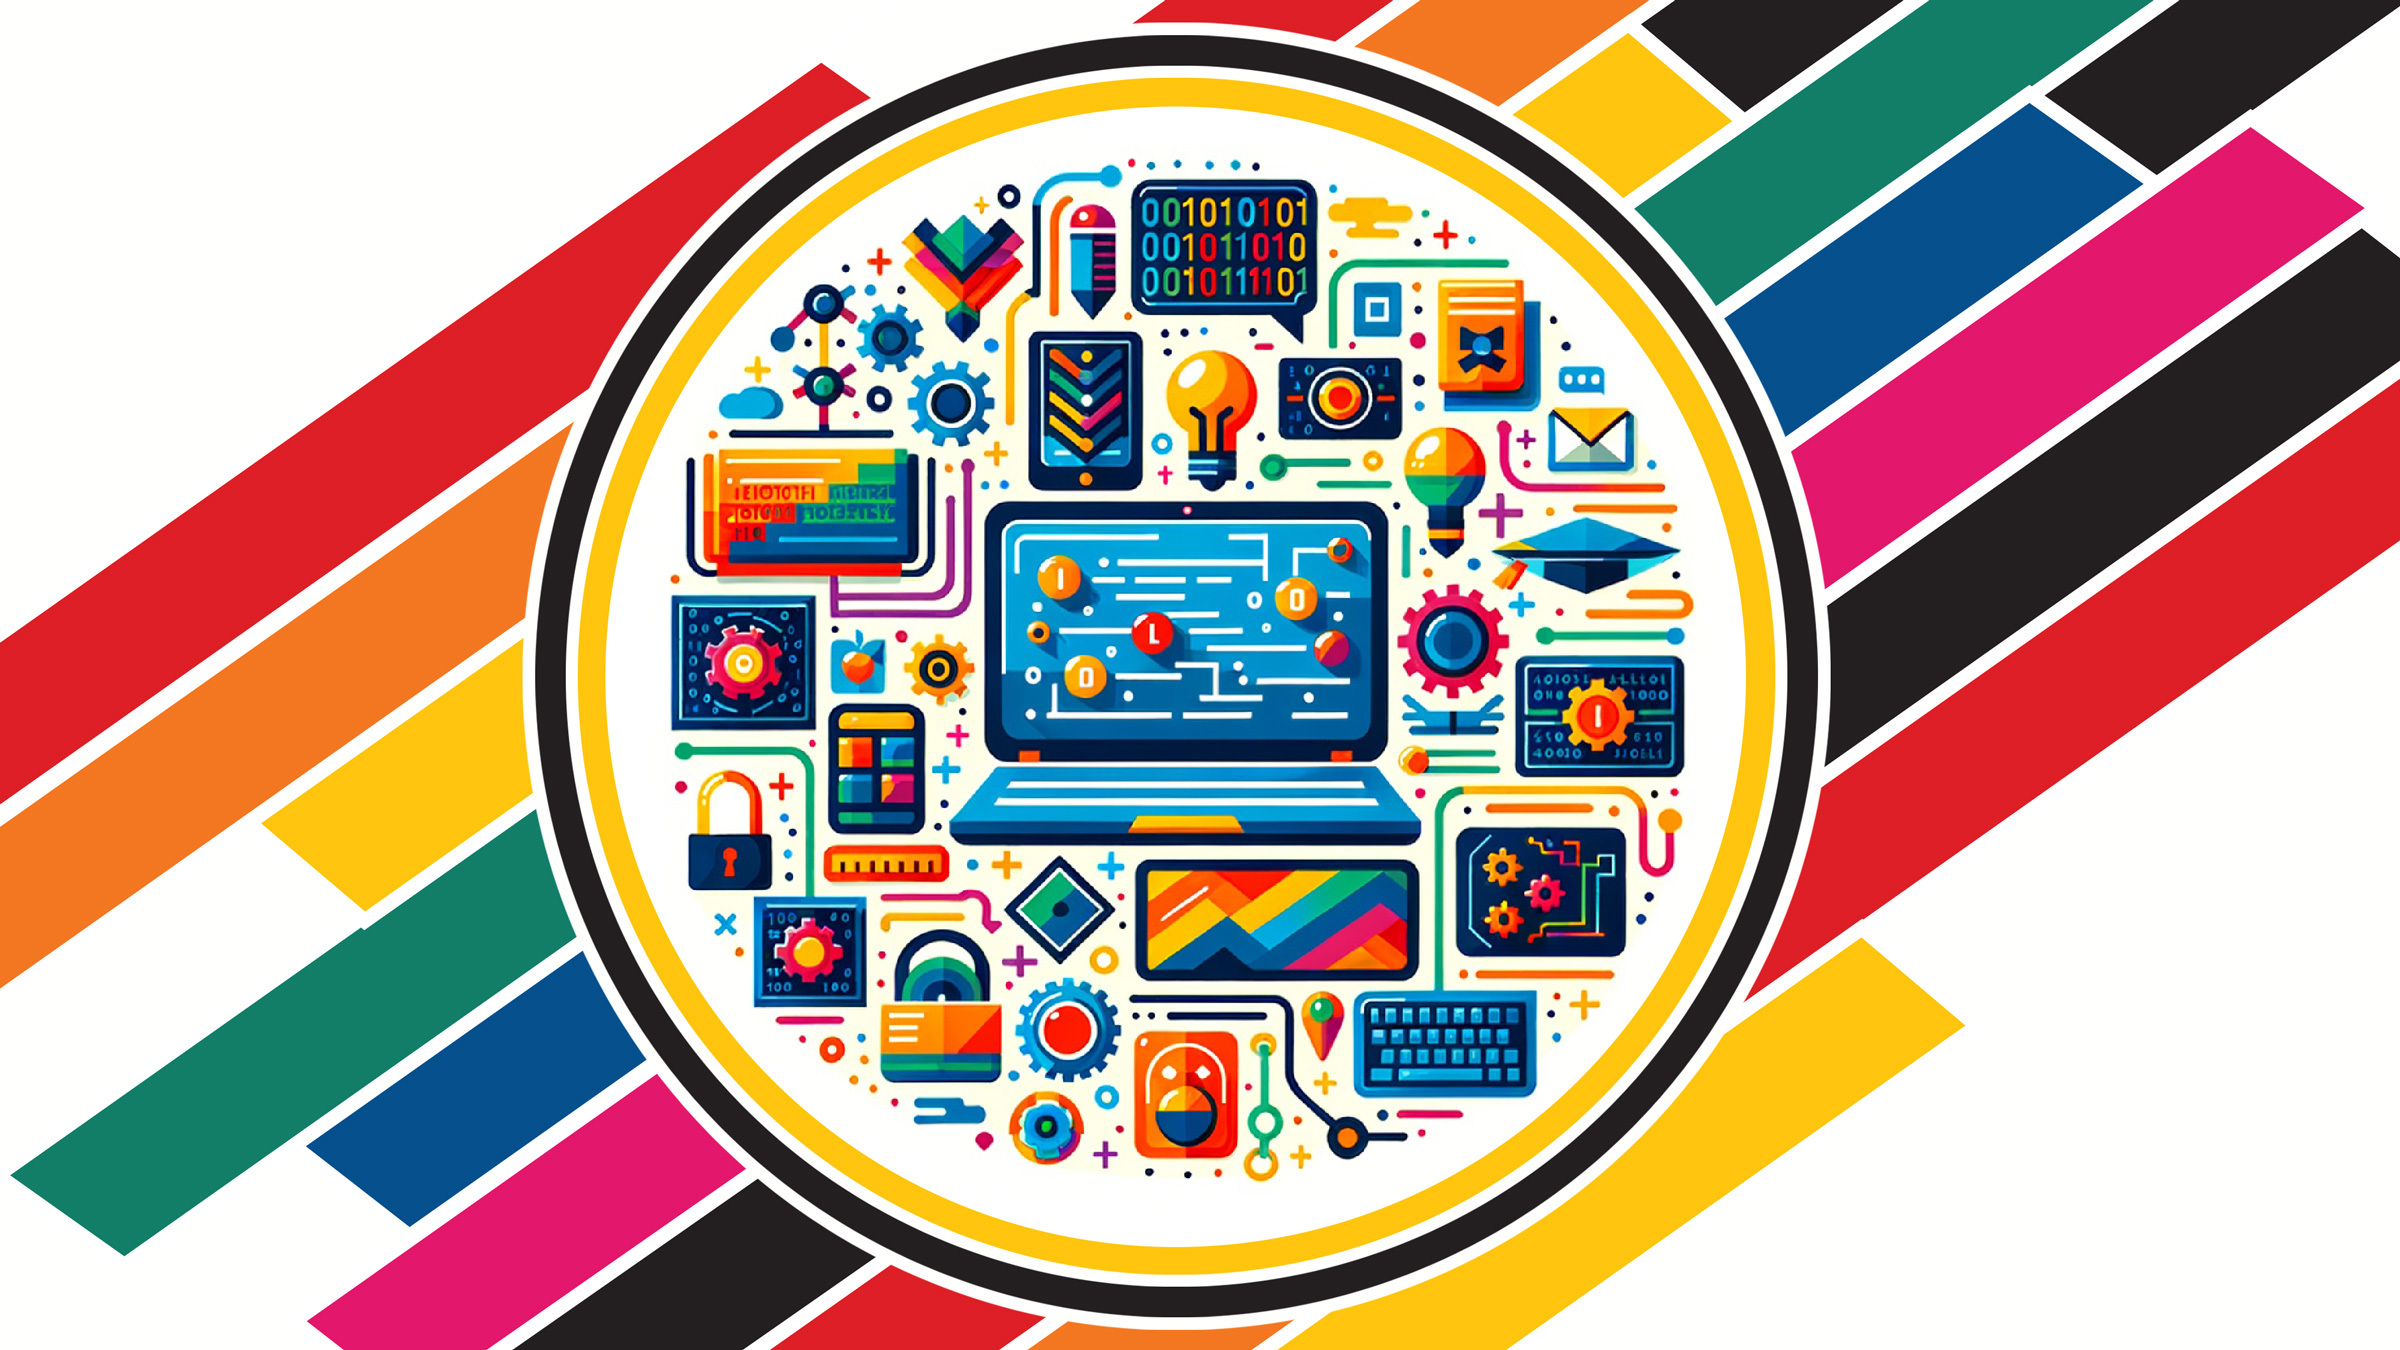 watch face crowded with computing education icons, illustration